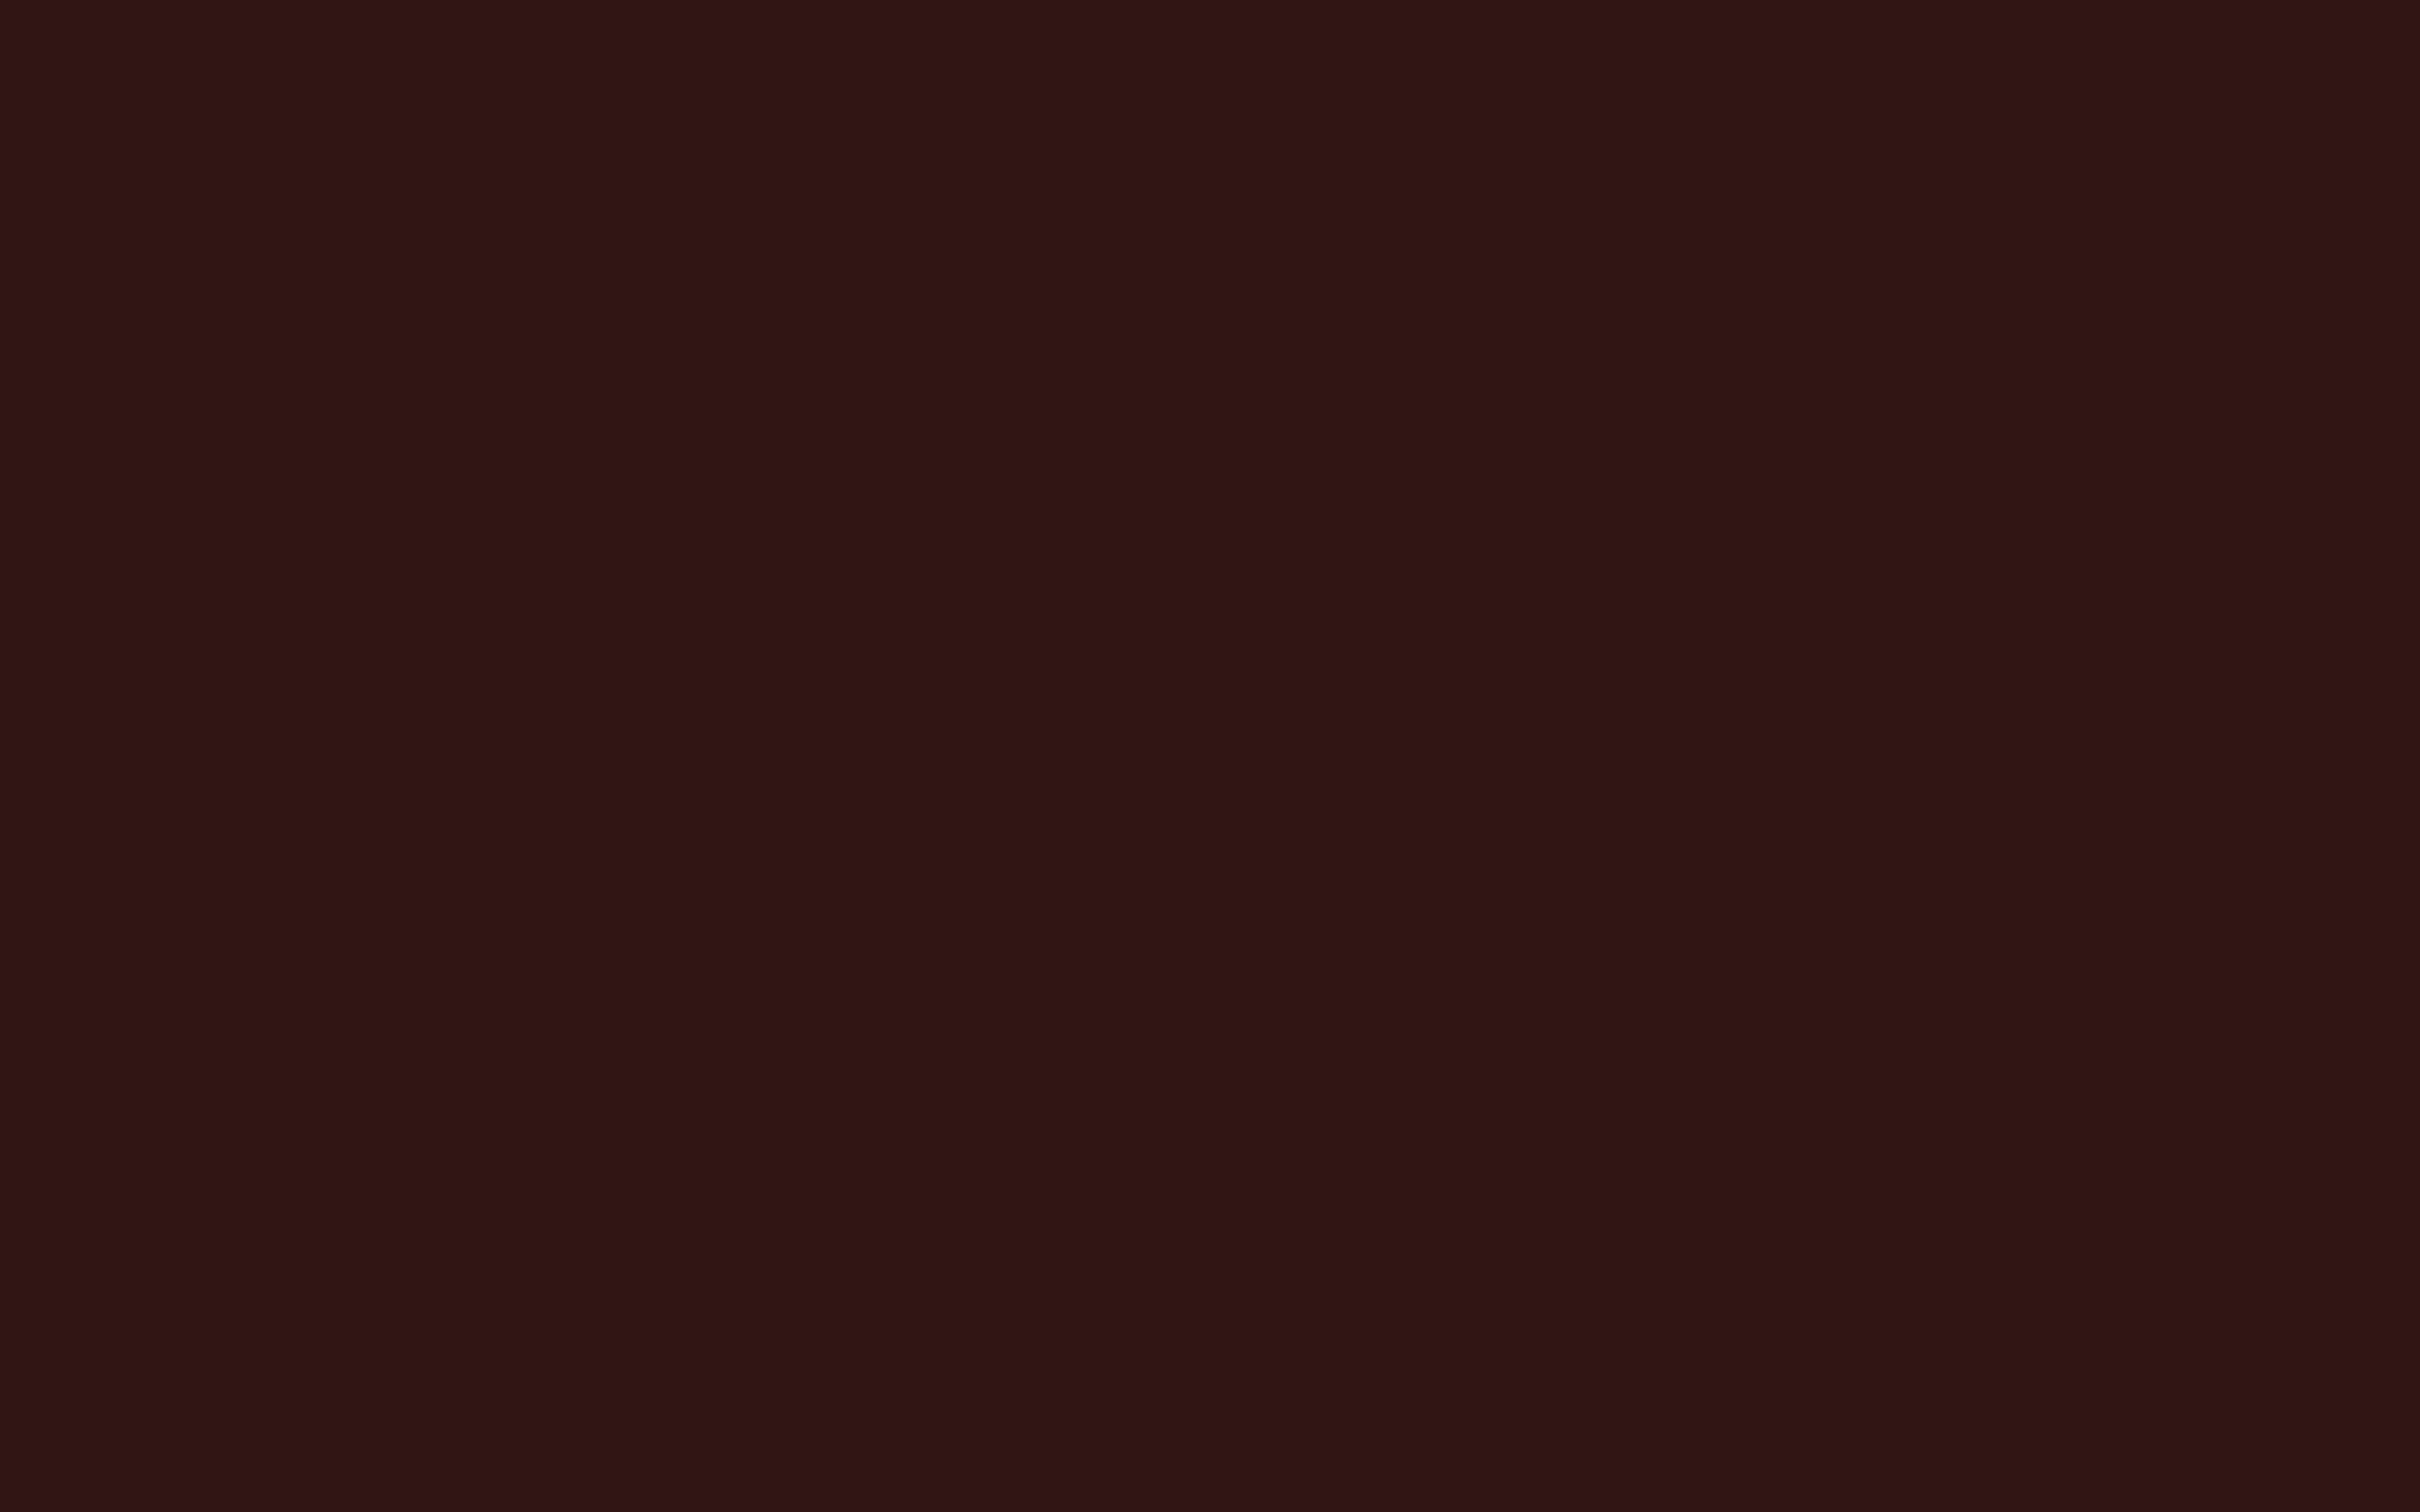 Background Color Solid Brown Image